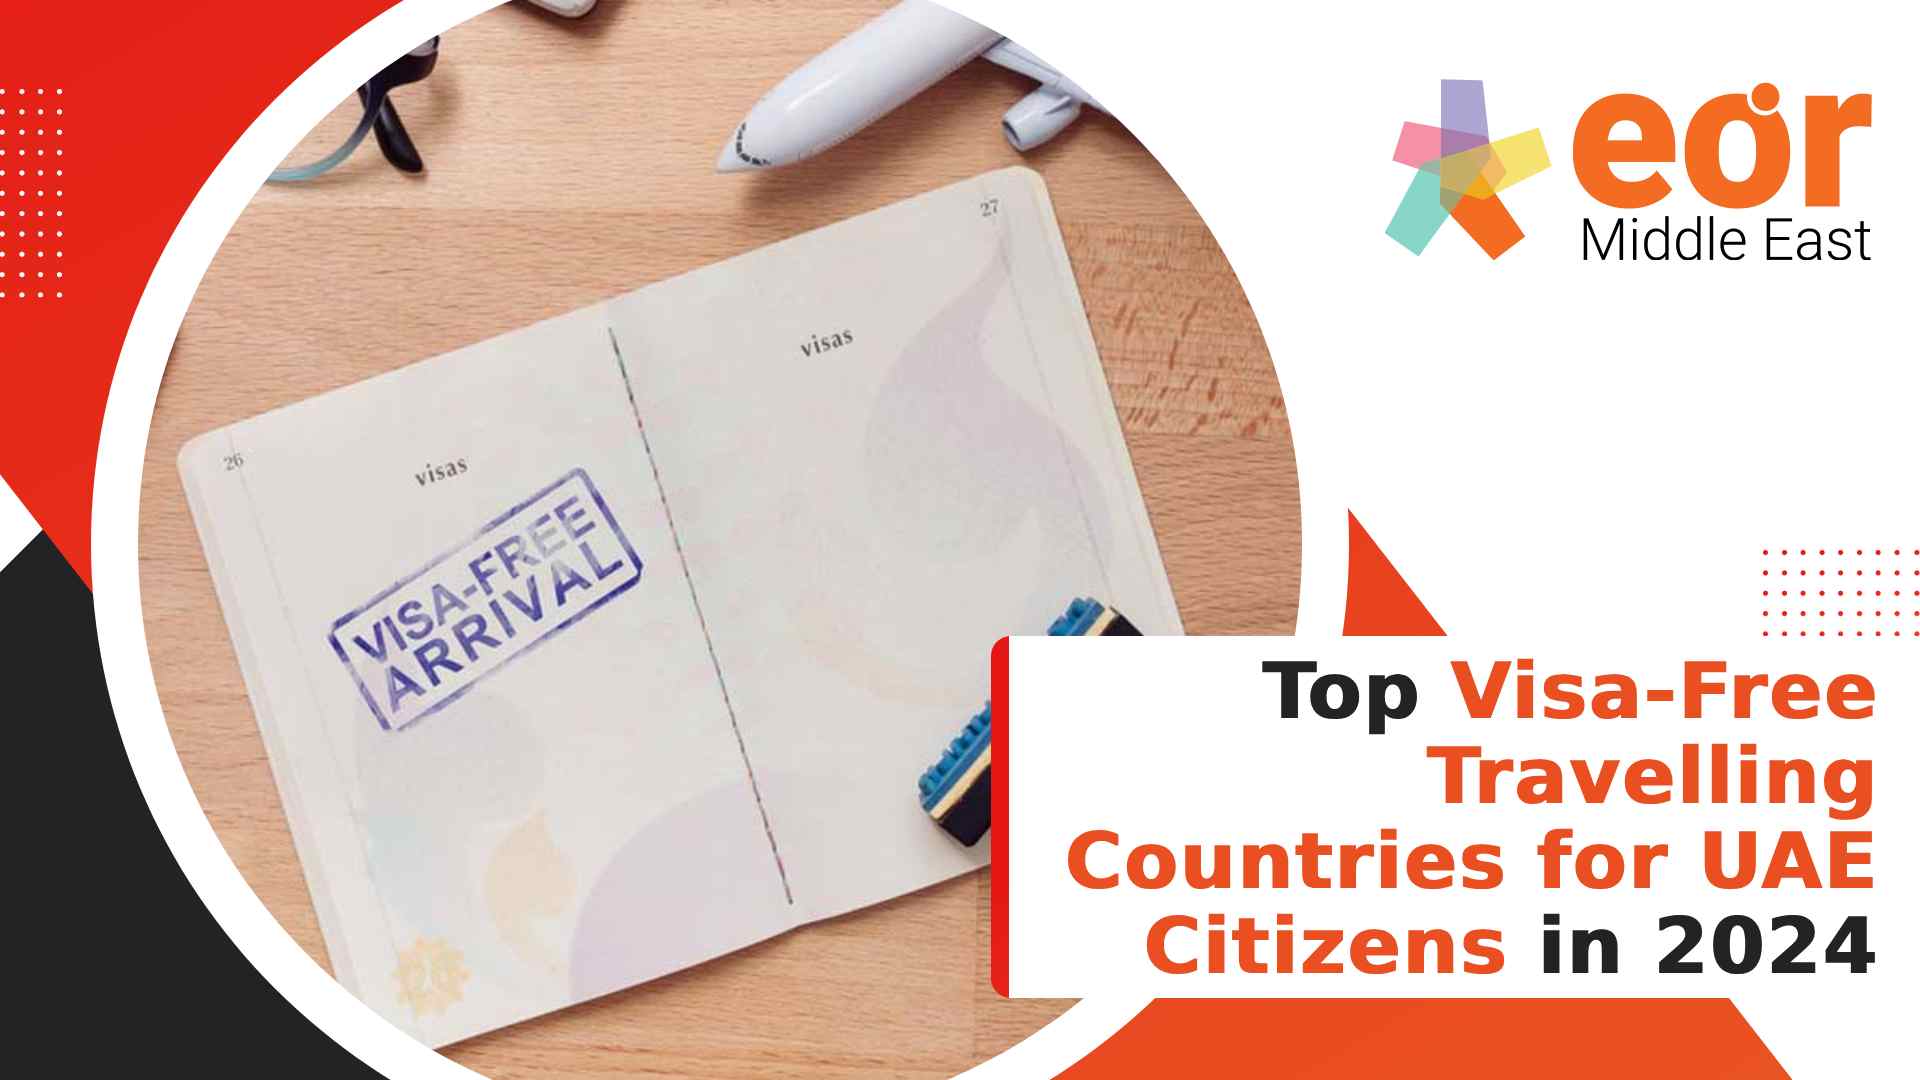 Top Visa-Free Travelling Countries for UAE Citizens in 2024